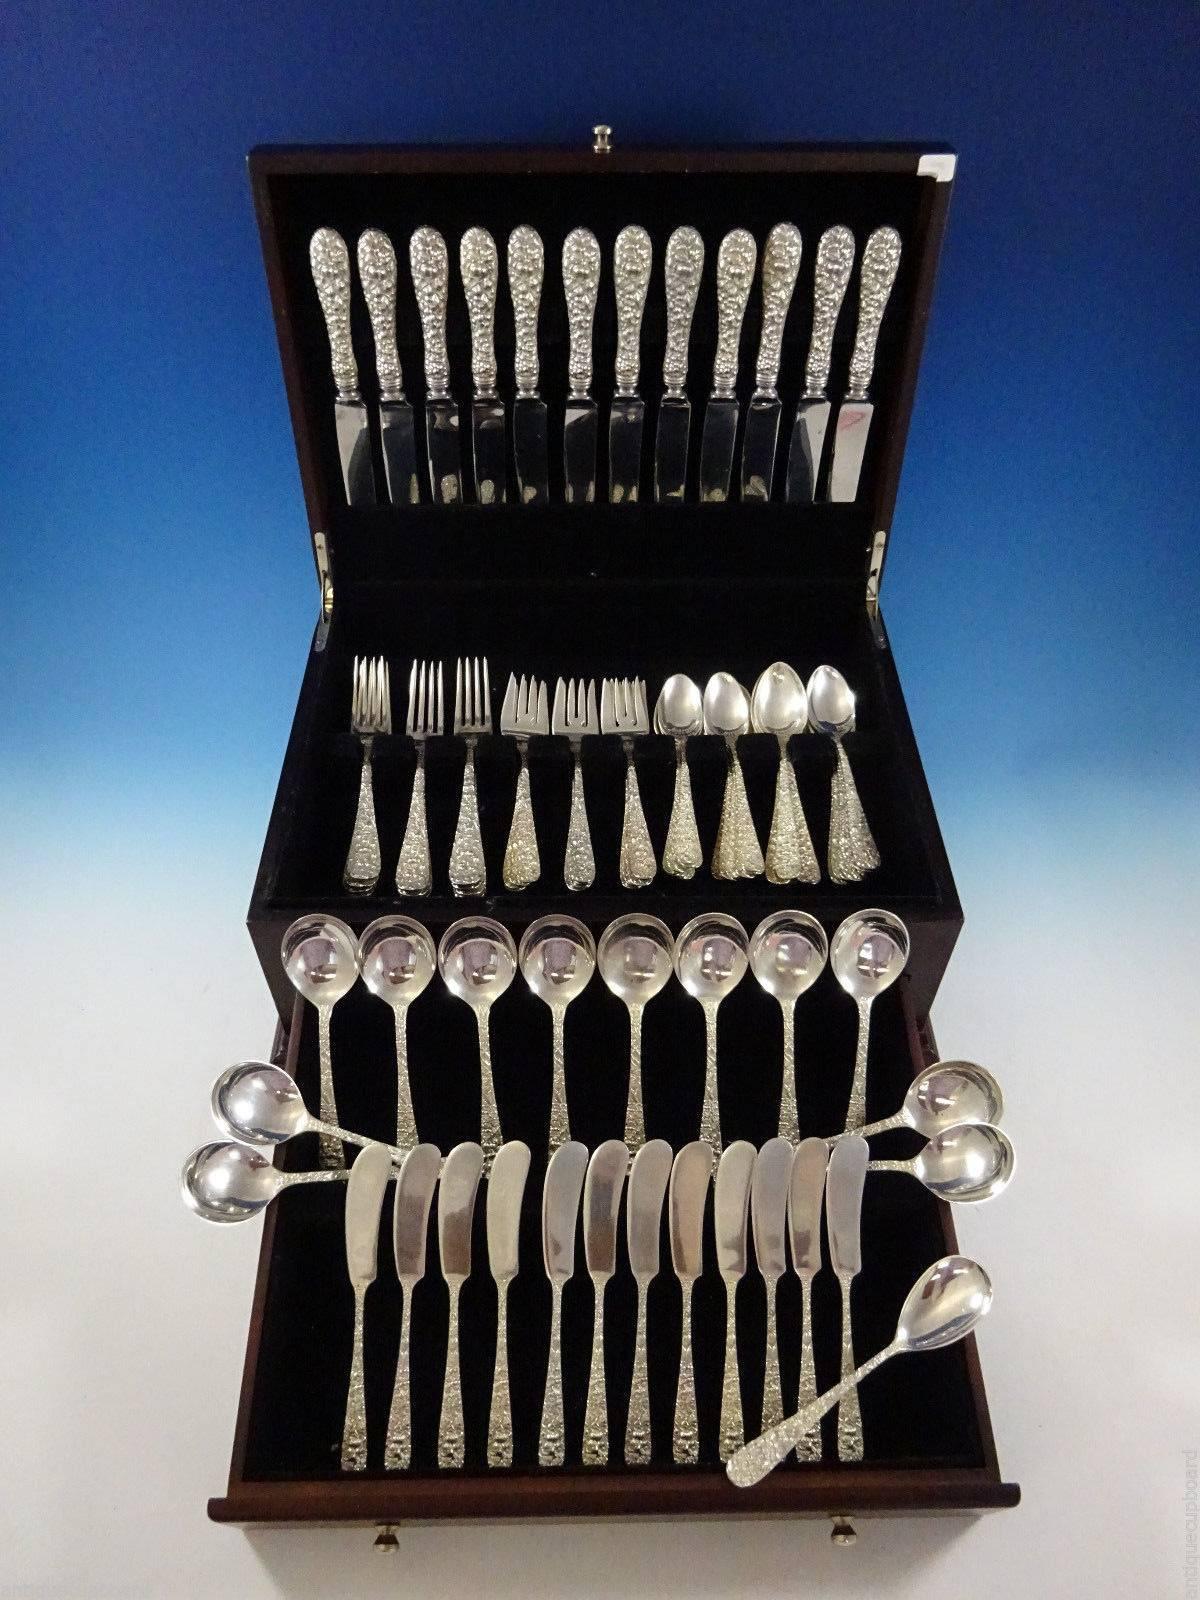 Rose by Stieff sterling silver flatware set of 85 pieces. This set includes: 

12 knives, 9